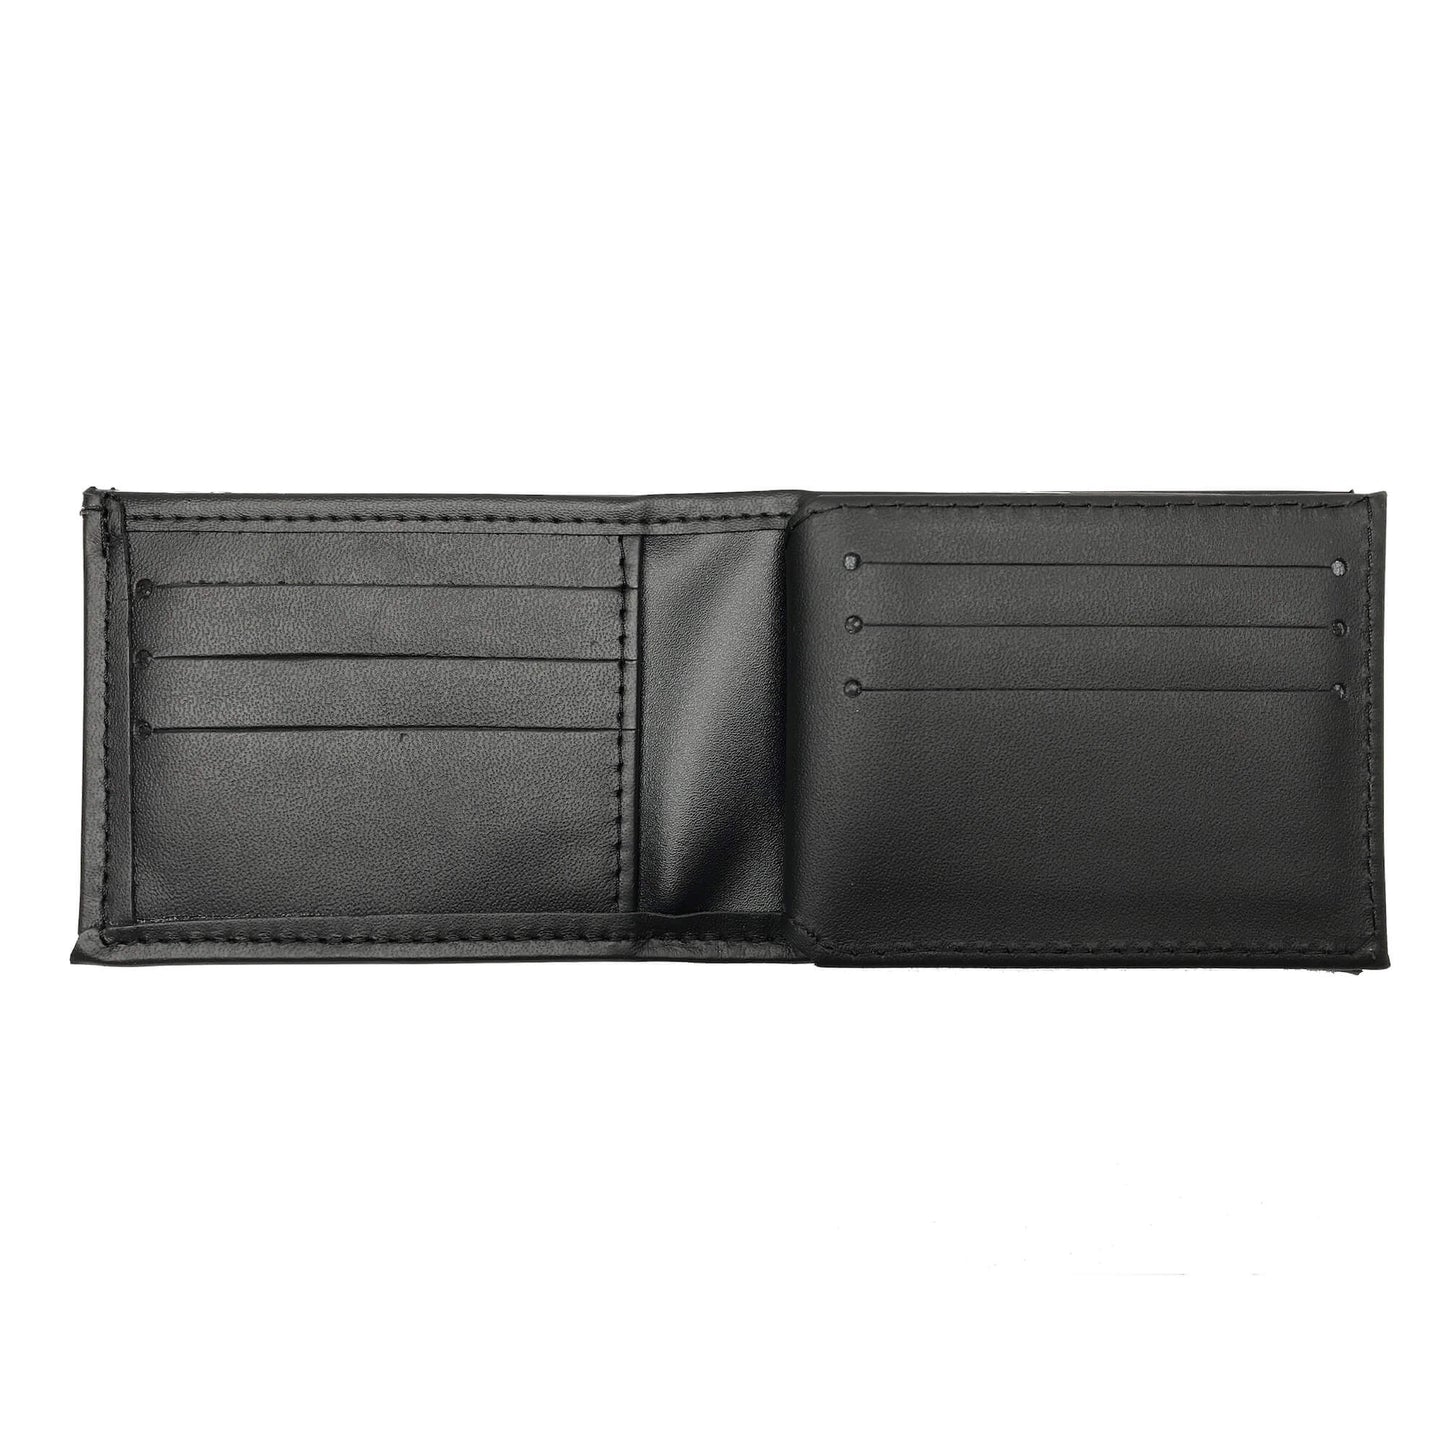 New York Police Department (NYPD) Detective Horizontal Bifold Hidden Badge Wallet-Perfect Fit-911 Duty Gear USA